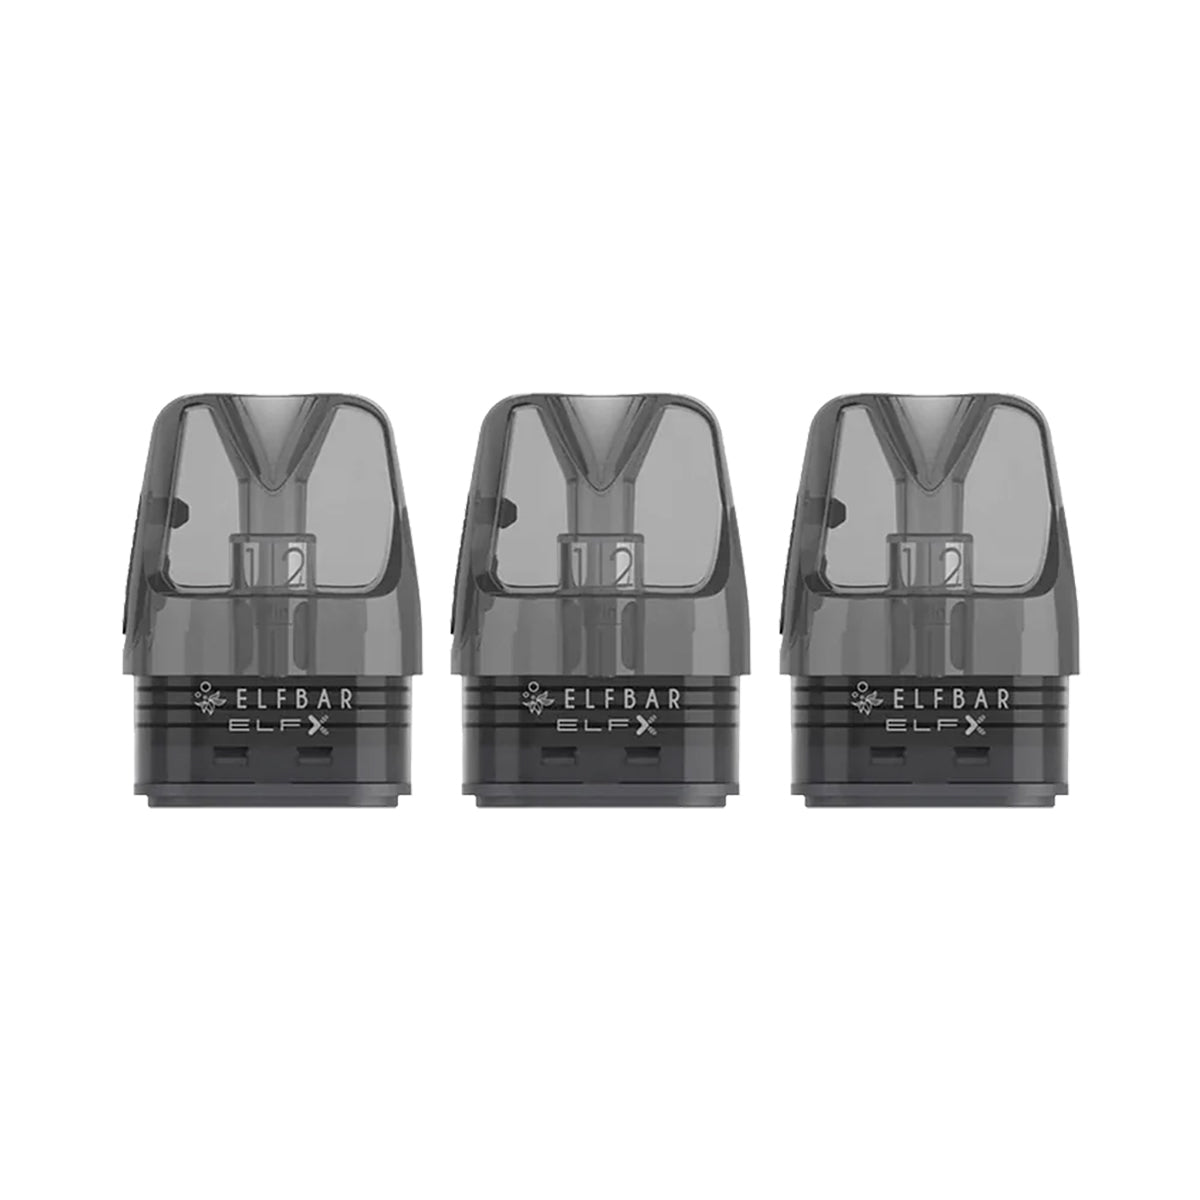 Elfx Replacement Pods By Elf Bar - Pack Of 3 - Prime Vapes UK